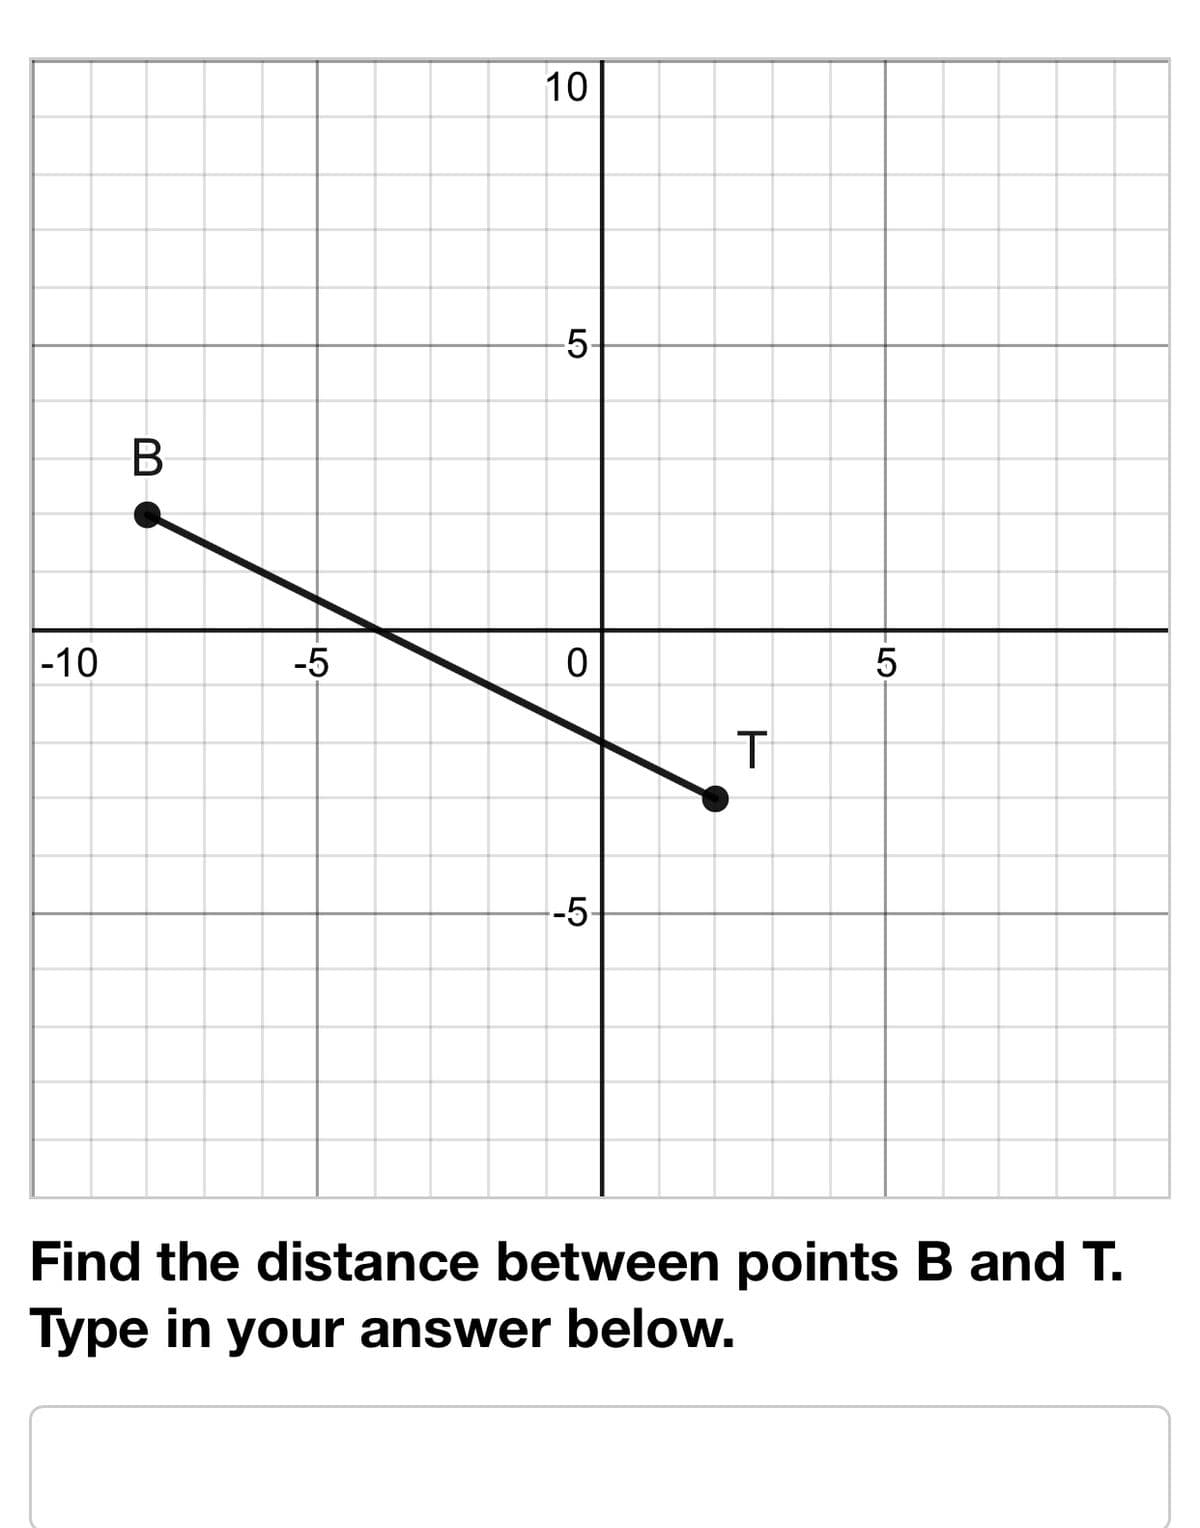 10
5-
-10
-5
-5-
Find the distance between points B and T.
Type in your answer below.
LO
LO
